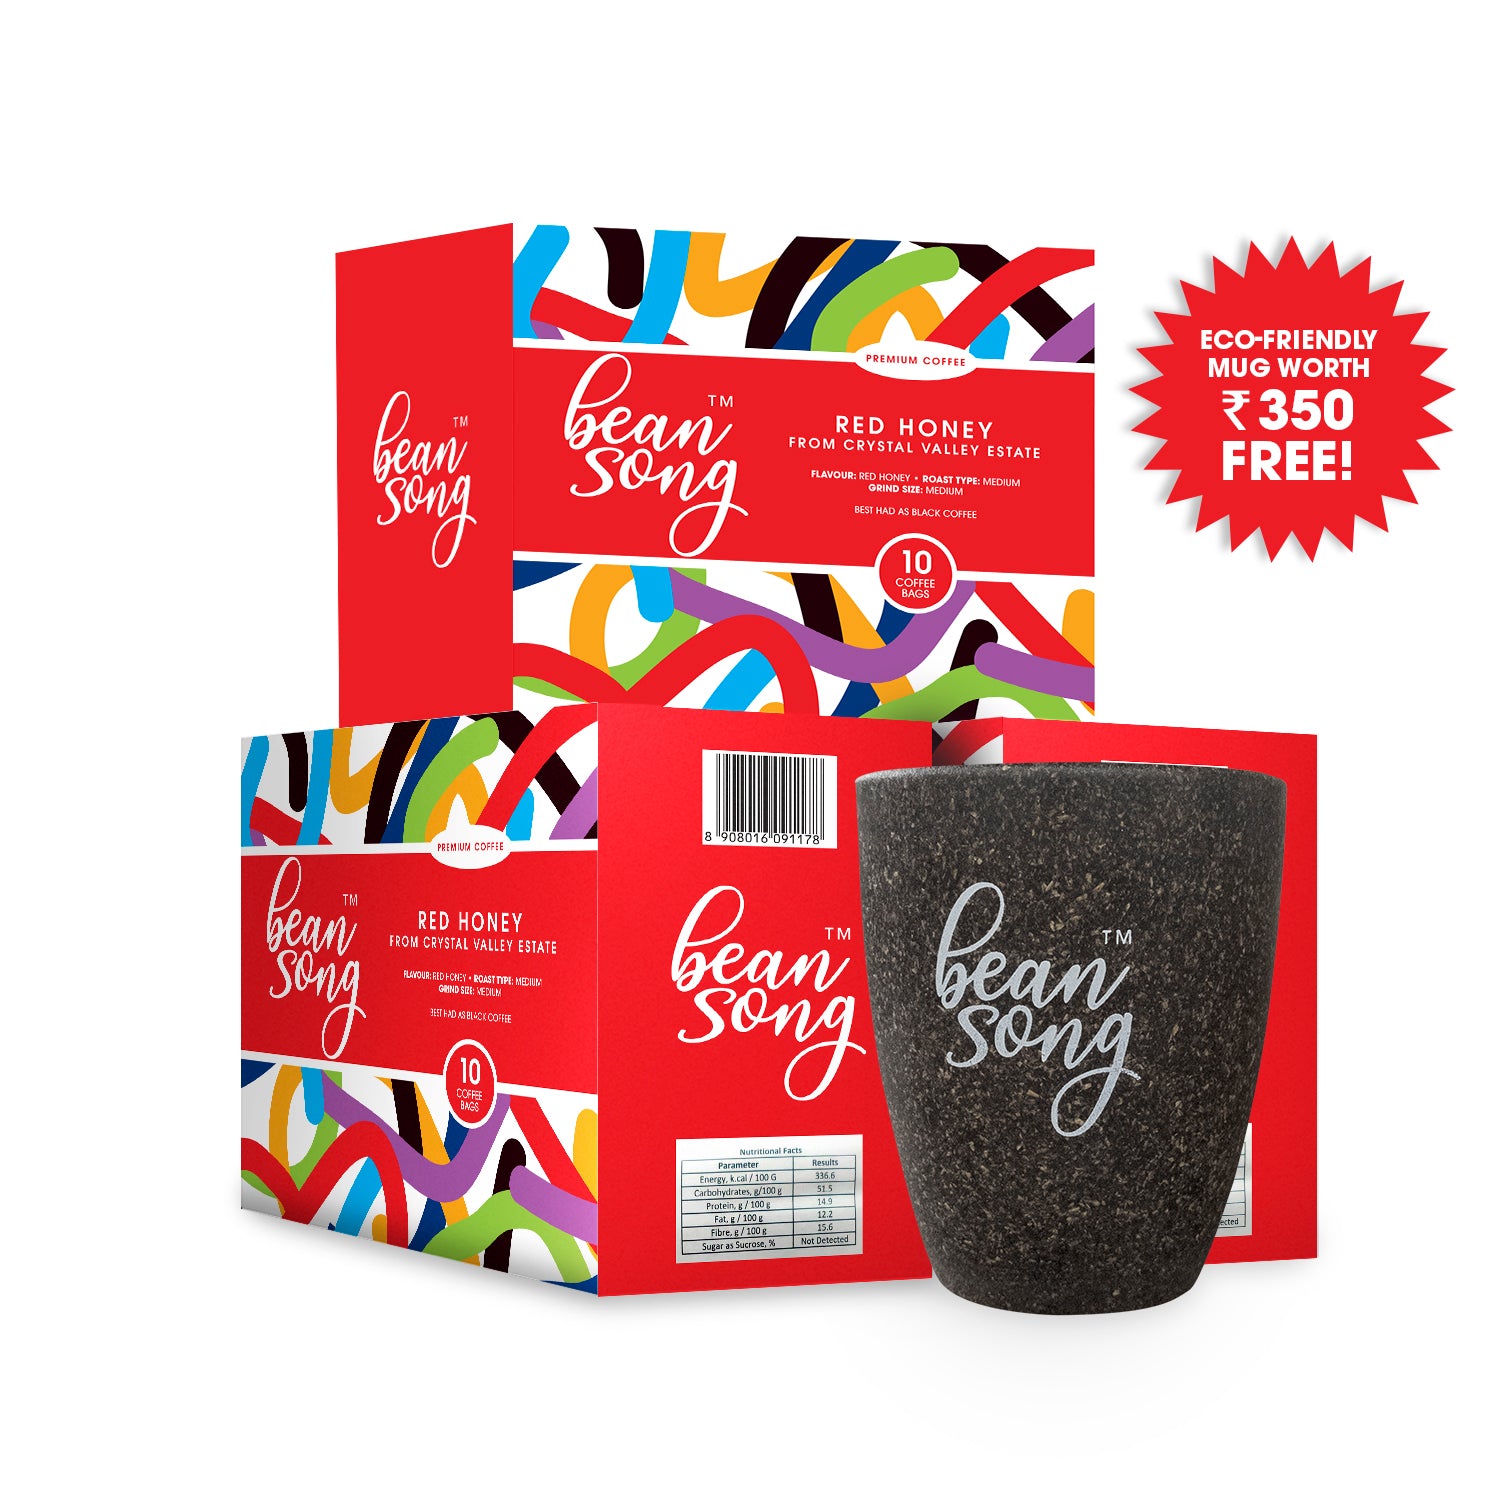 Red Honey Single Estate Coffee Drip Bags (10 Easy Pours) Pack of 3 with Free Coffee Mug